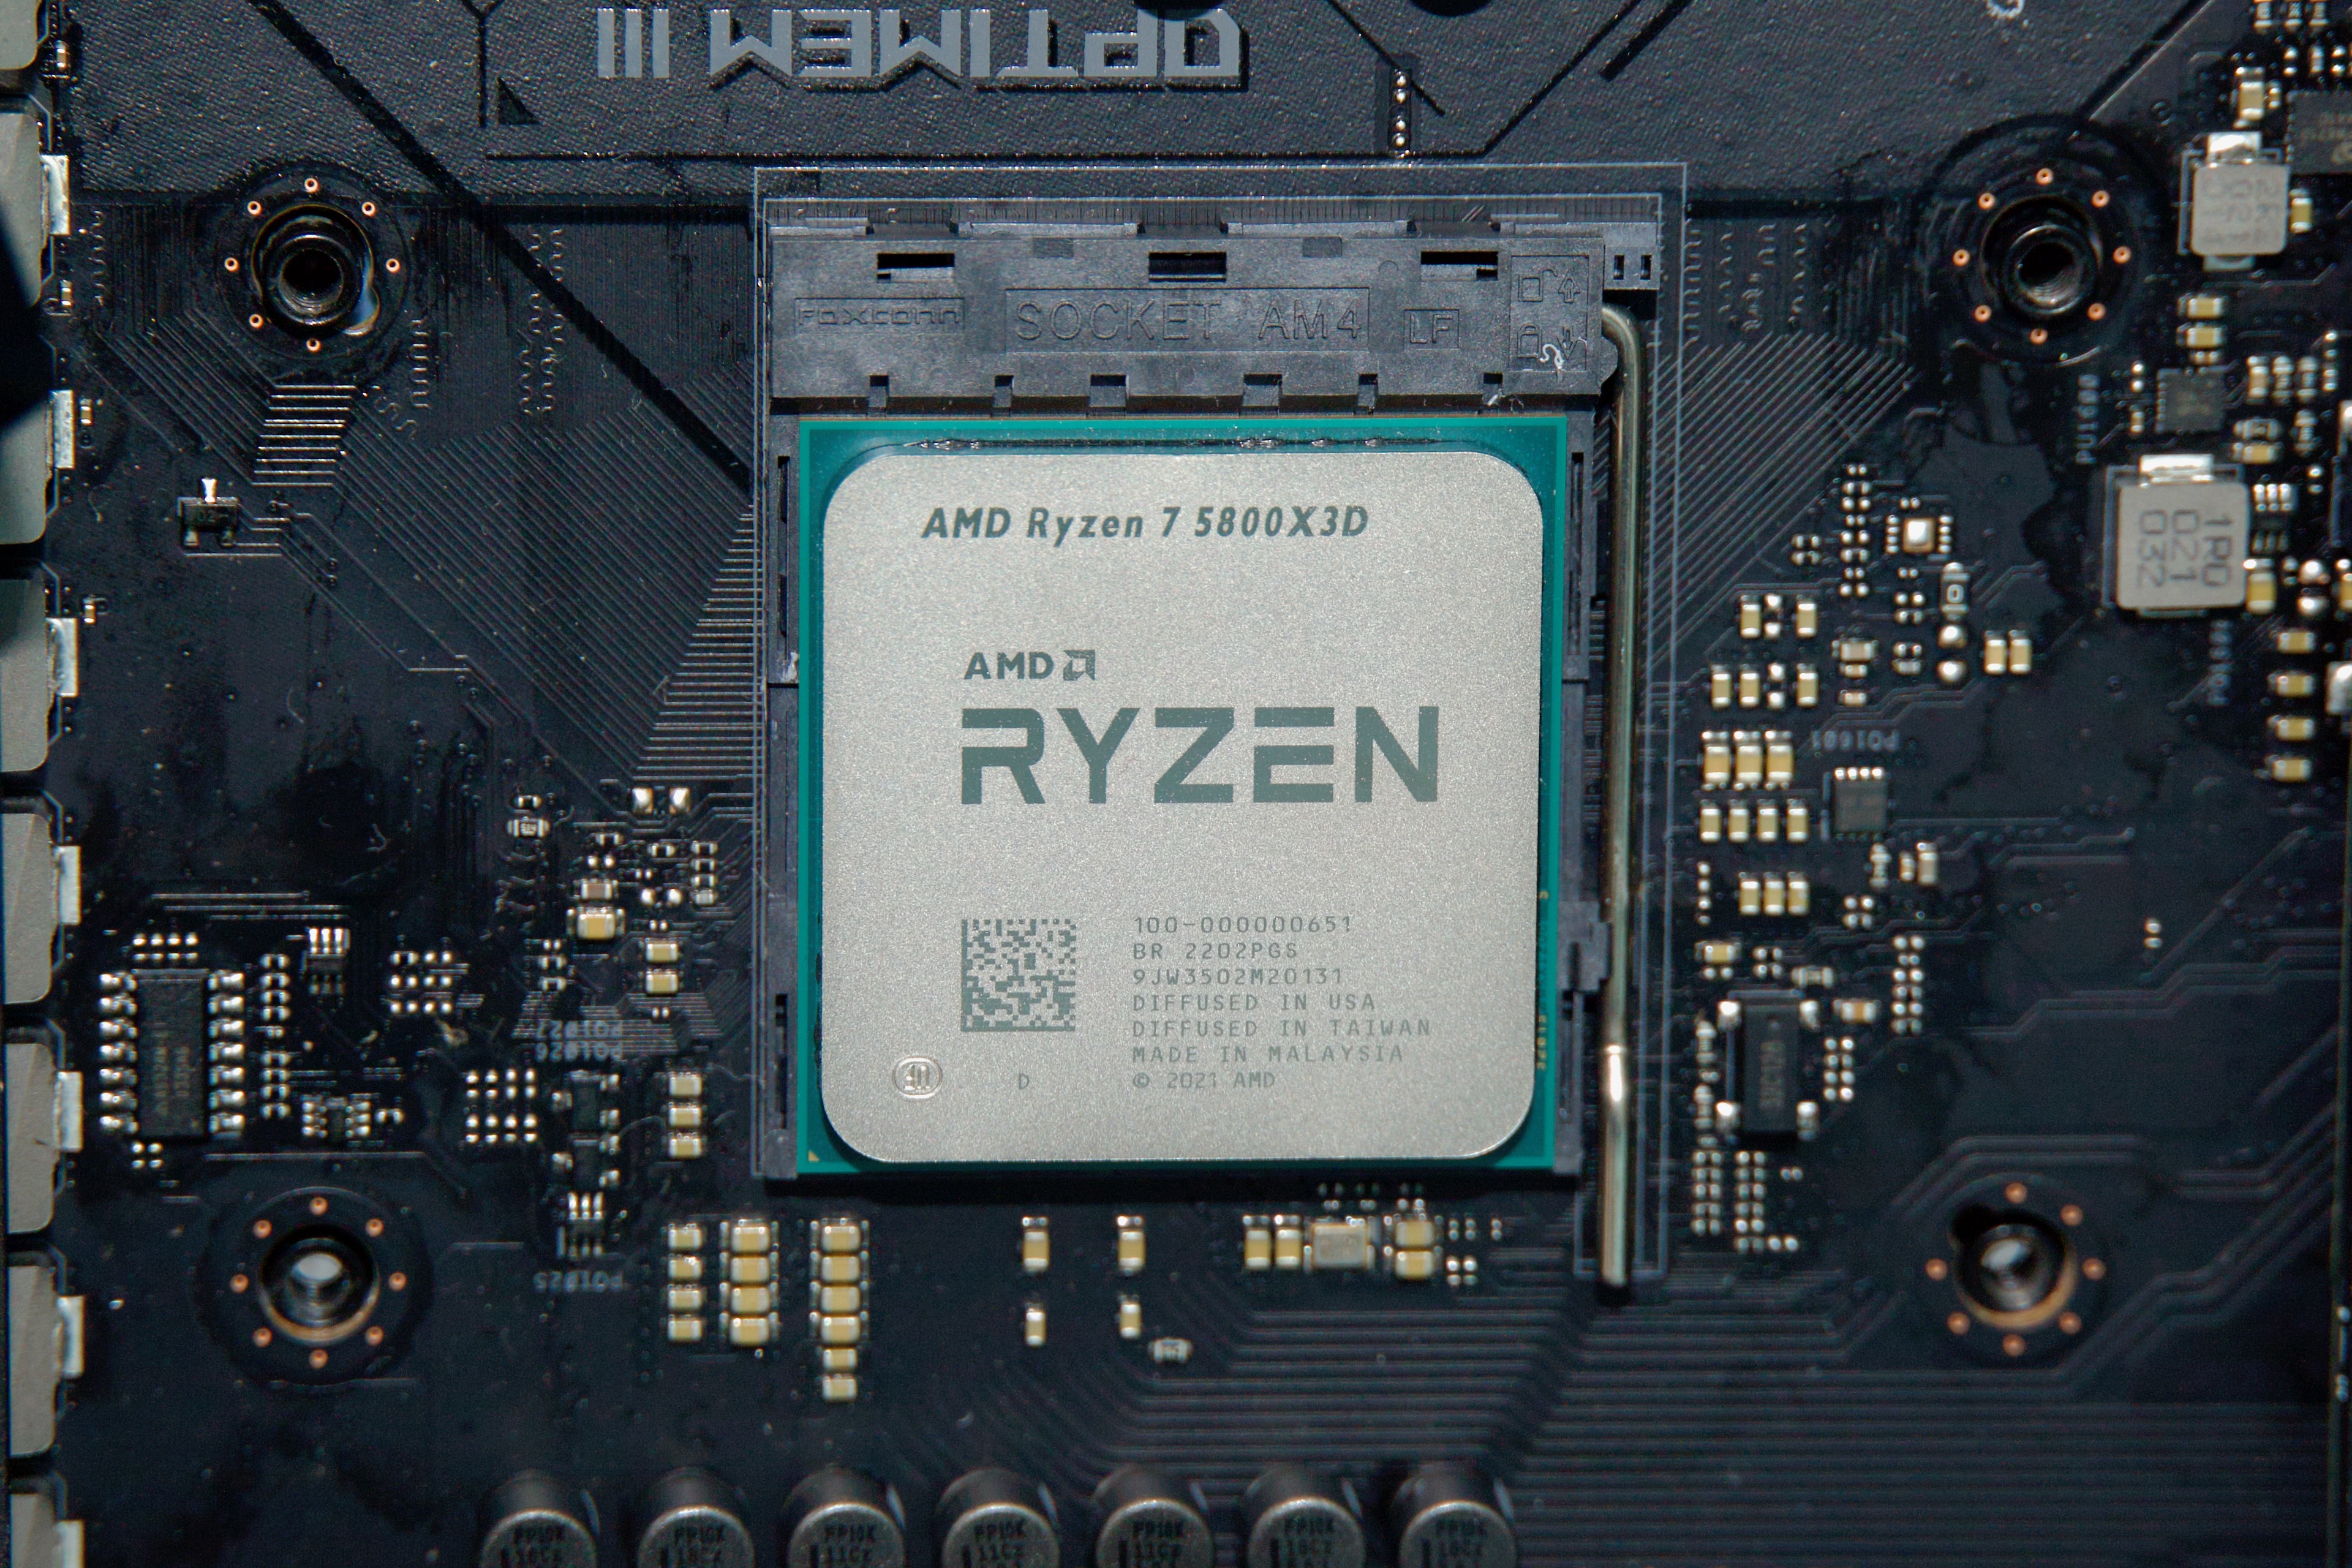 Review: Ryzen 7 5800X3D is an interesting tech demo that's hard to  recommend